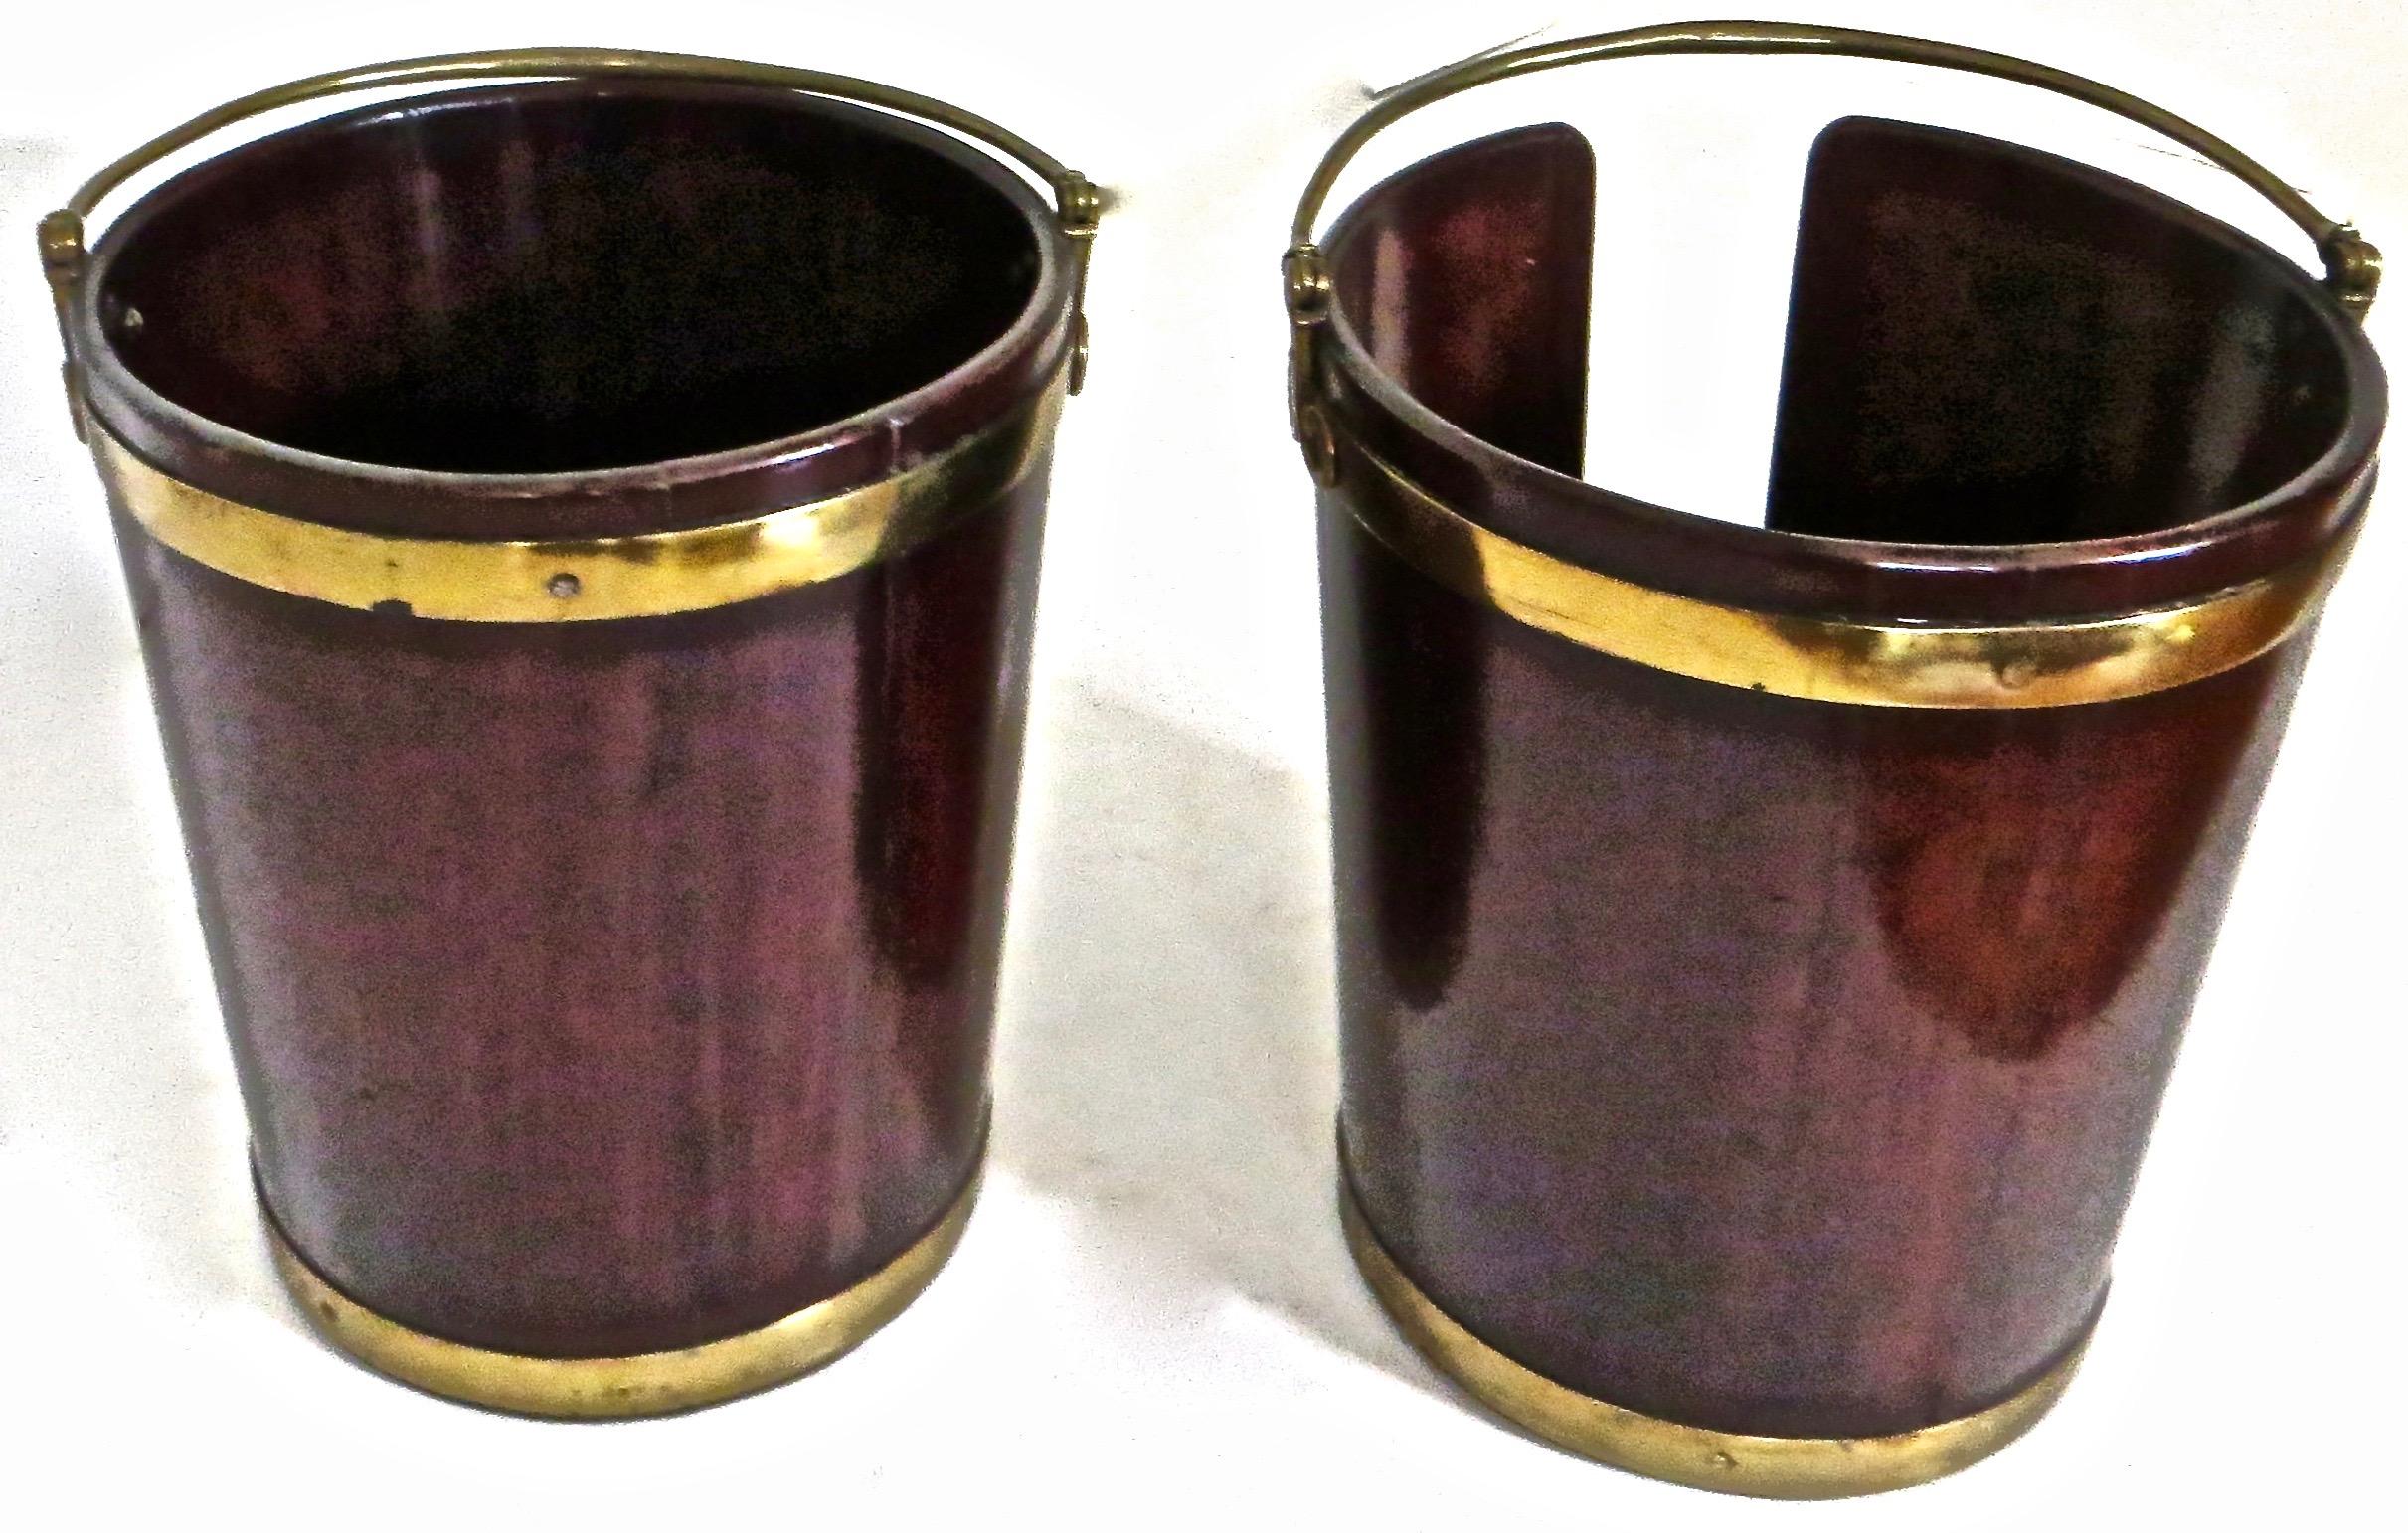 Pair of English Georgian mahogany brass-bound buckets, circa 1770. Buckets are well made, sturdy, and in excellent condition and completely original and intact. These handsome buckets are made of mahogany and brass bound with bands around the